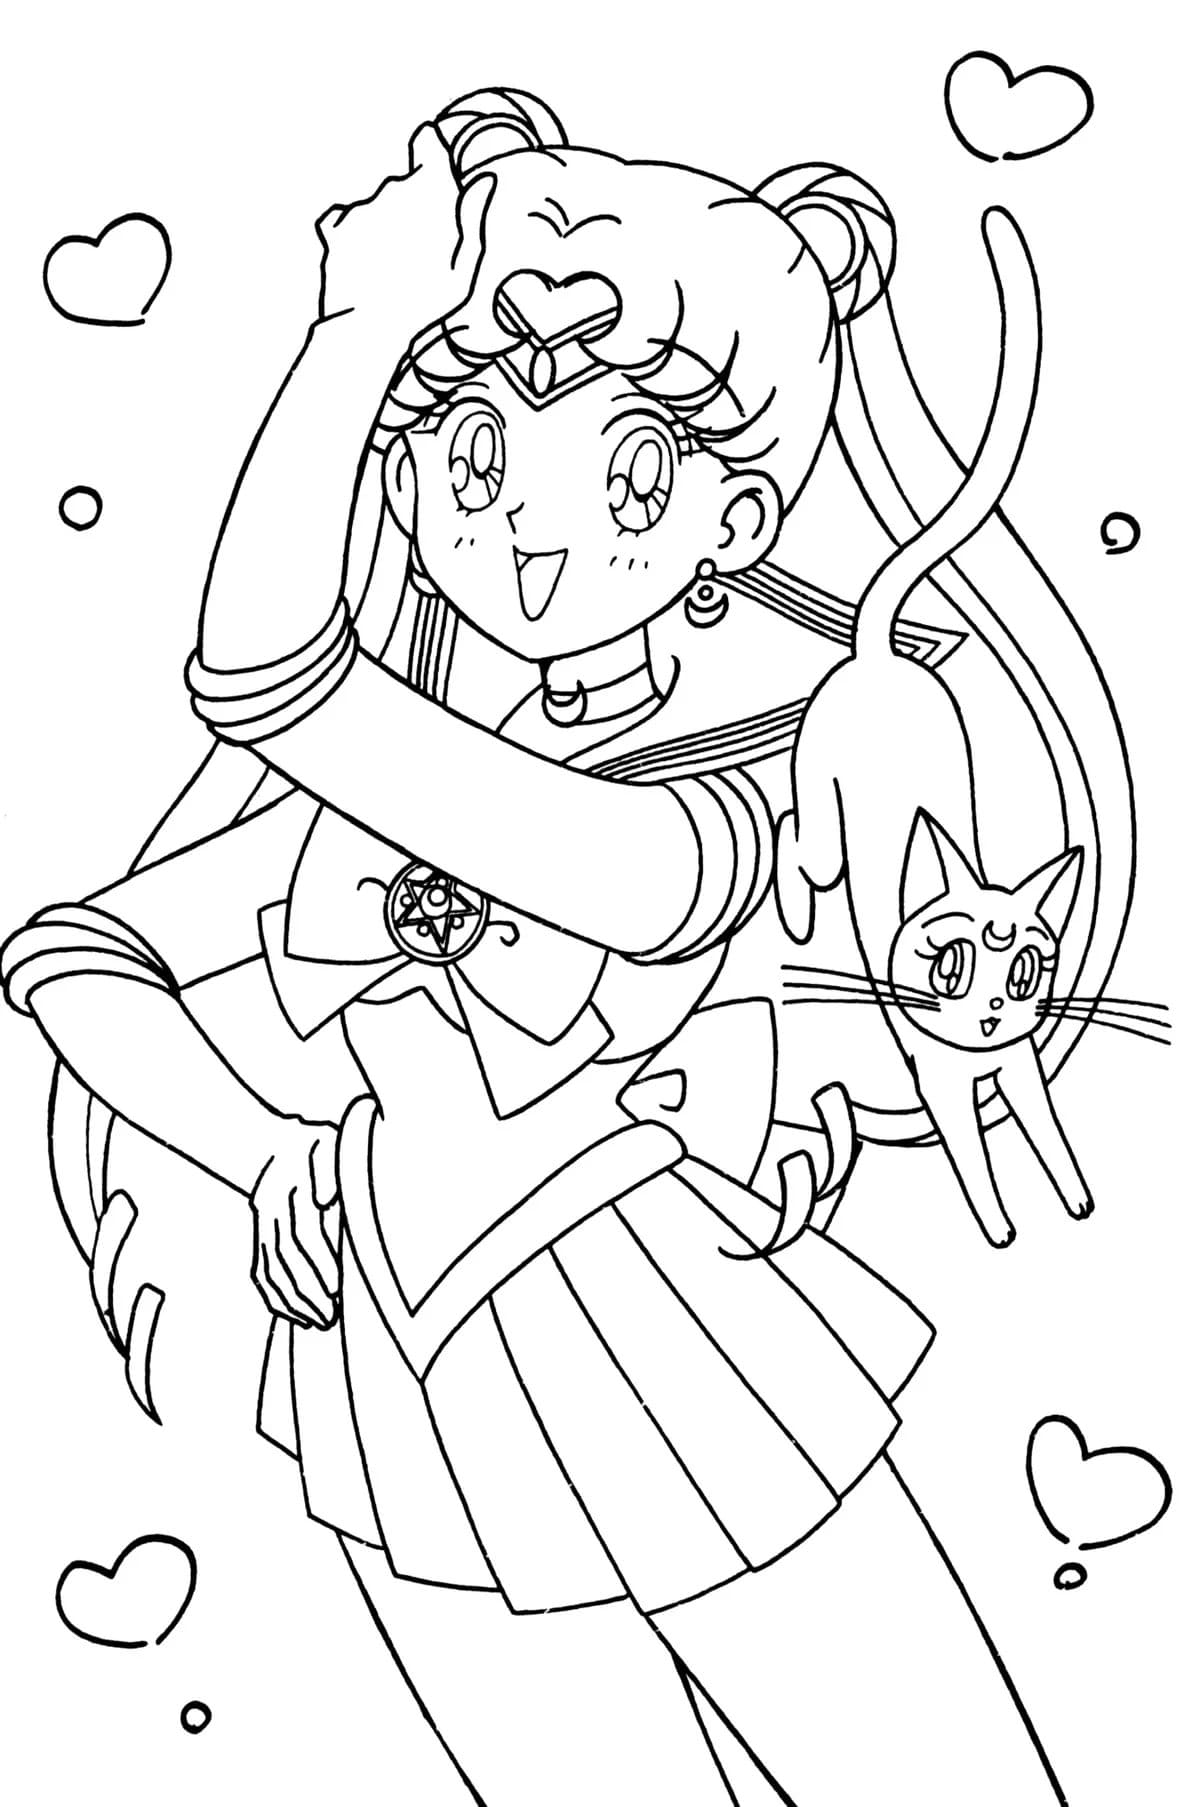 Sailor Moon Coloring Pages | 100 Free Coloring Pages